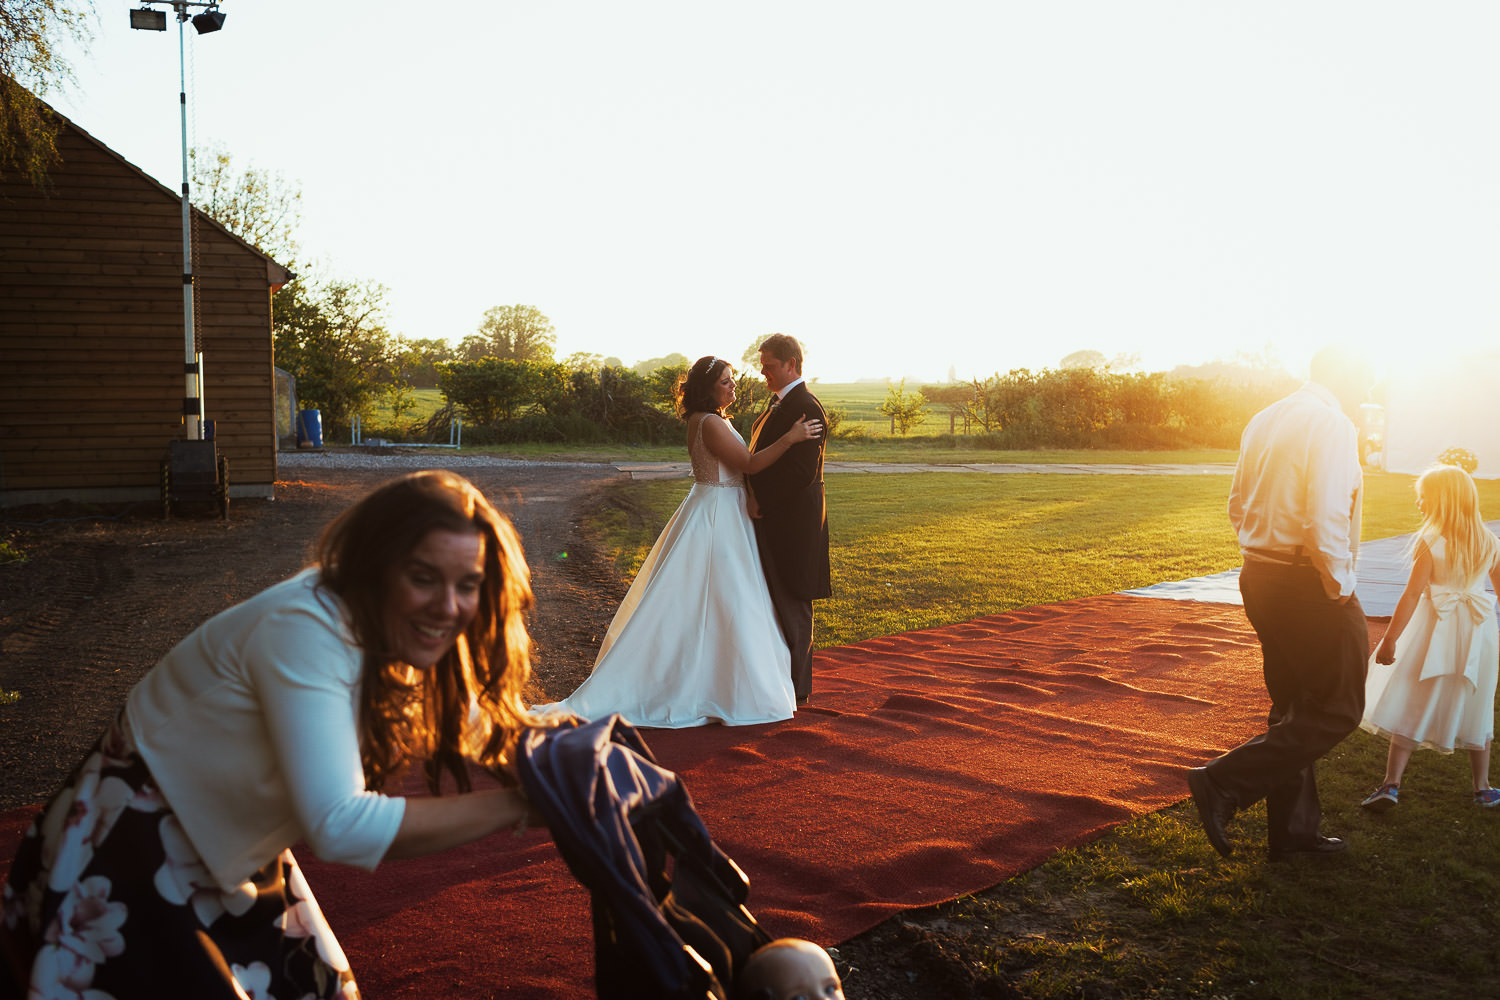 A candid moment from an Essex wedding. The bride and groom or stood facing each other while wedding guests walk past. A woman is pushing a buggy in the foreground. The sun is setting.